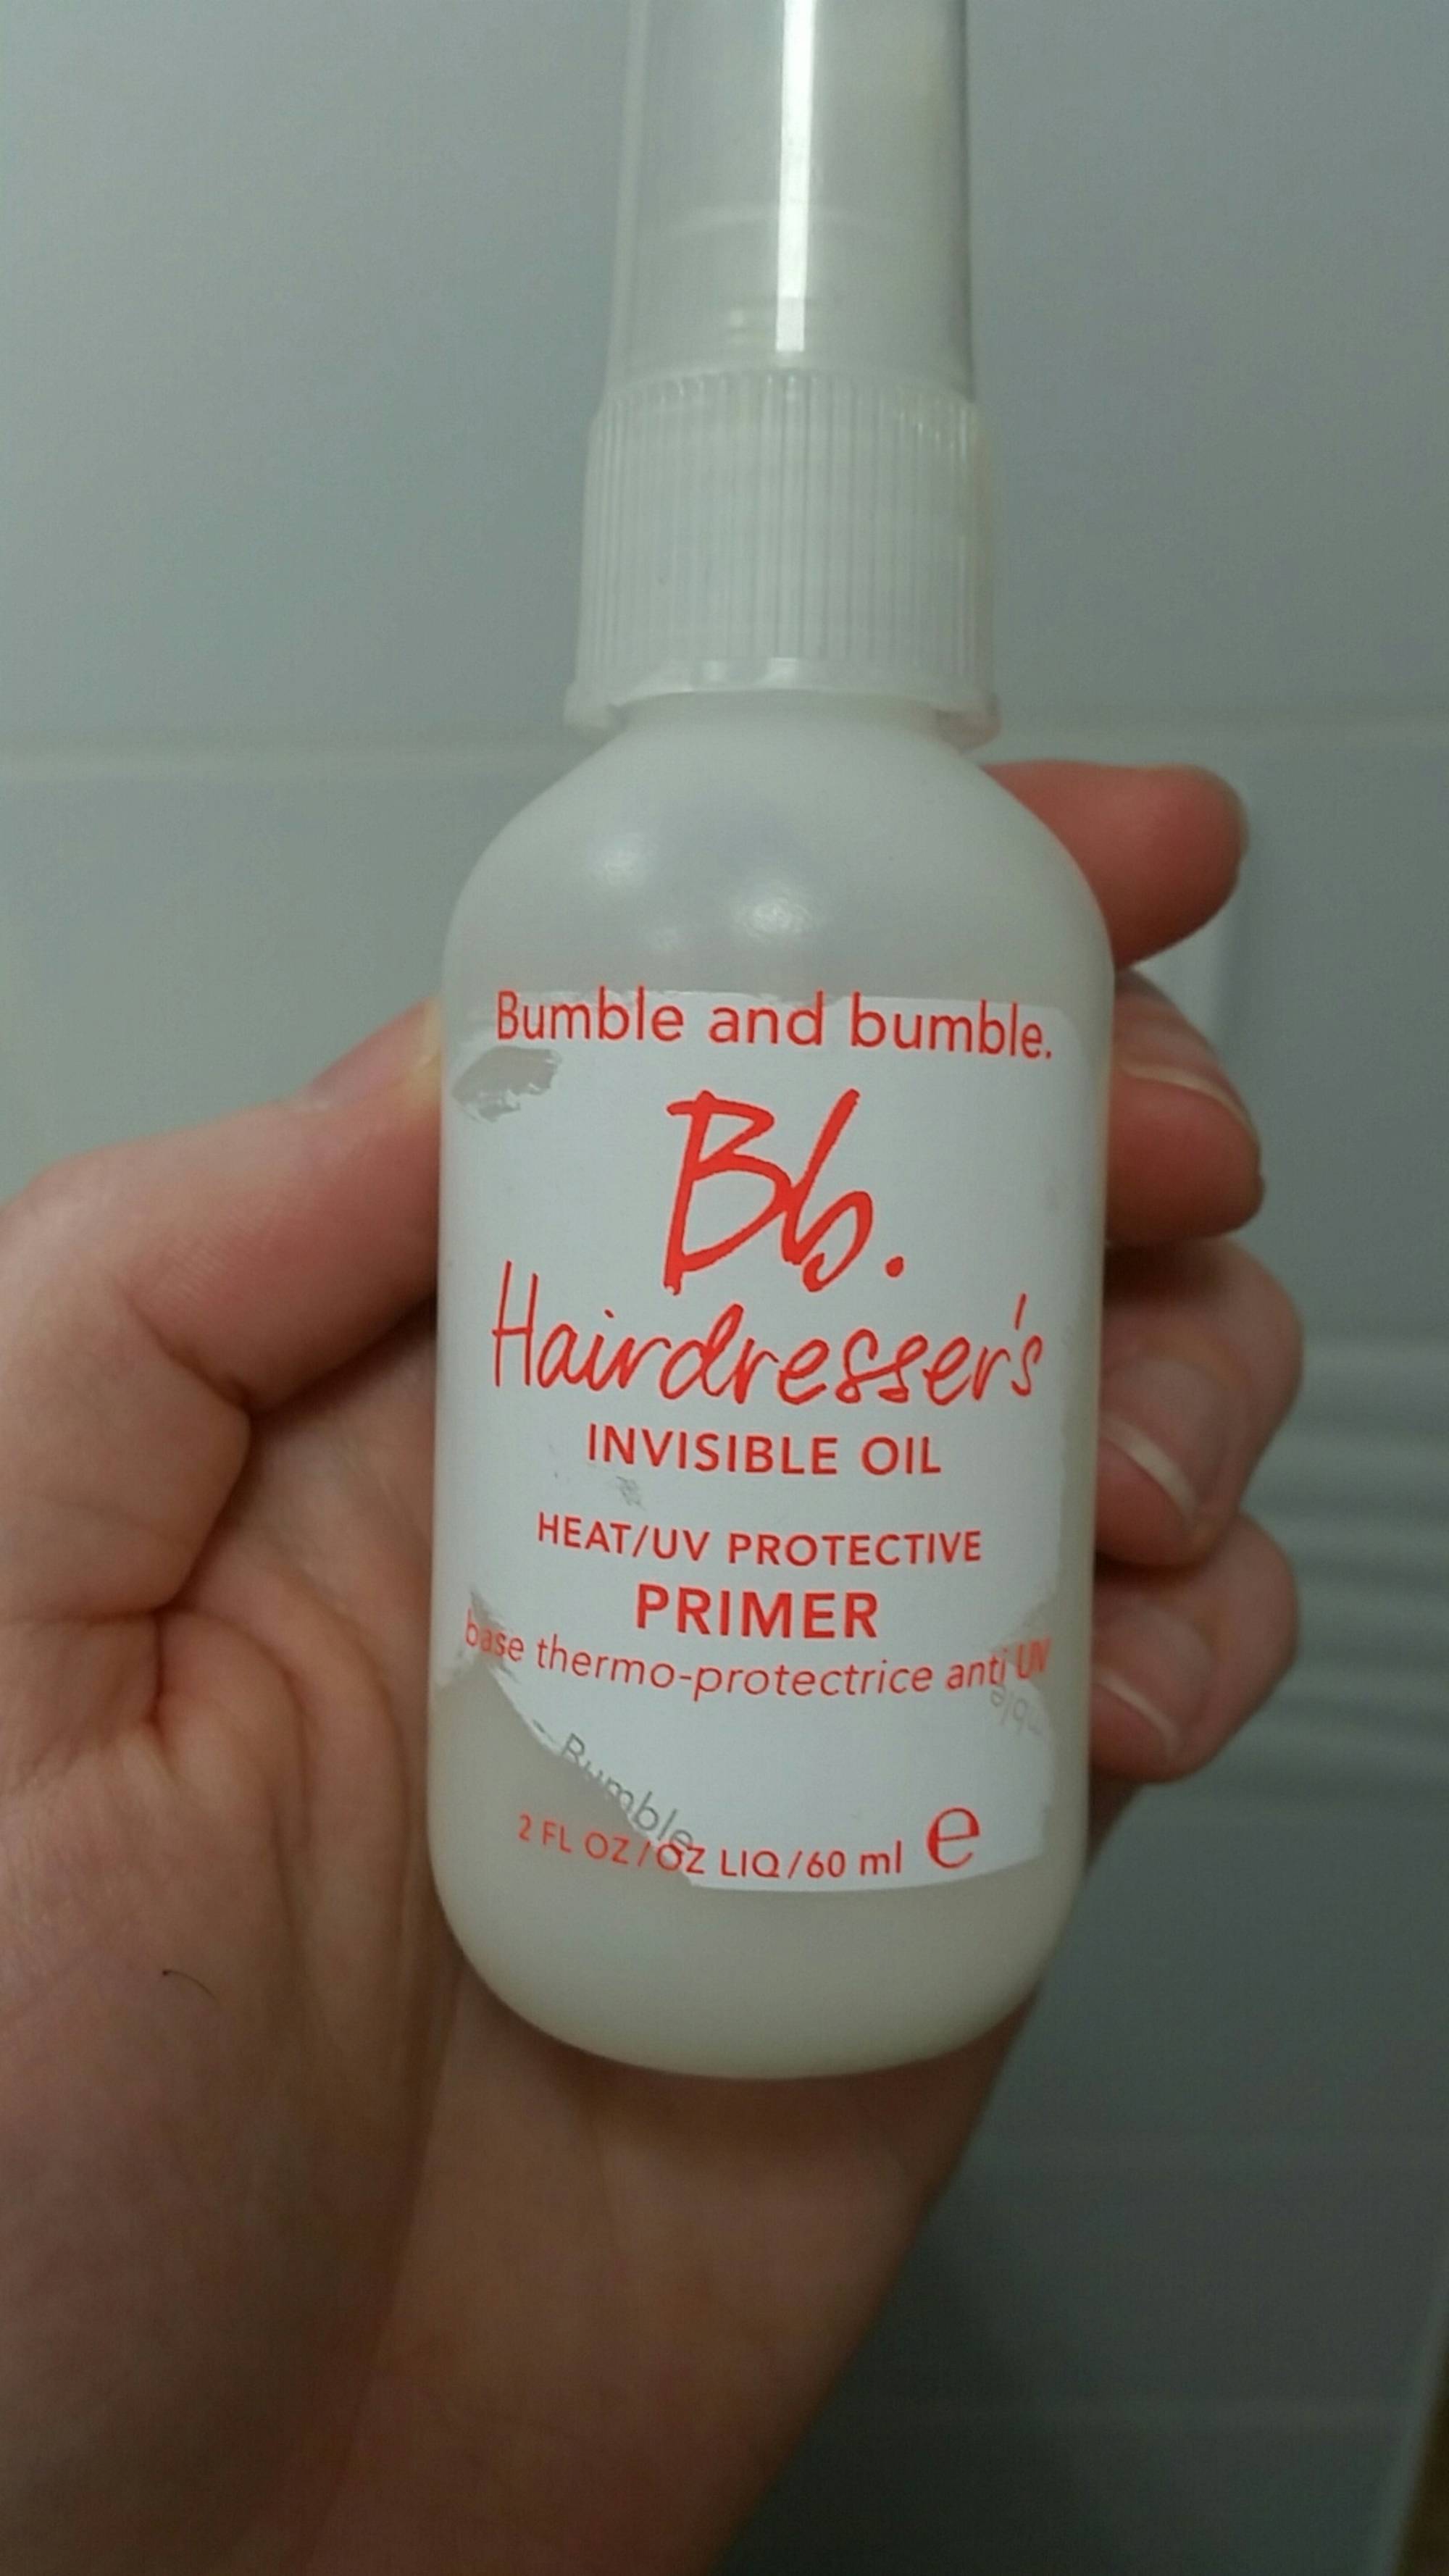 BUMBLE AND BUMBLE - Hairdresser's invisible oil